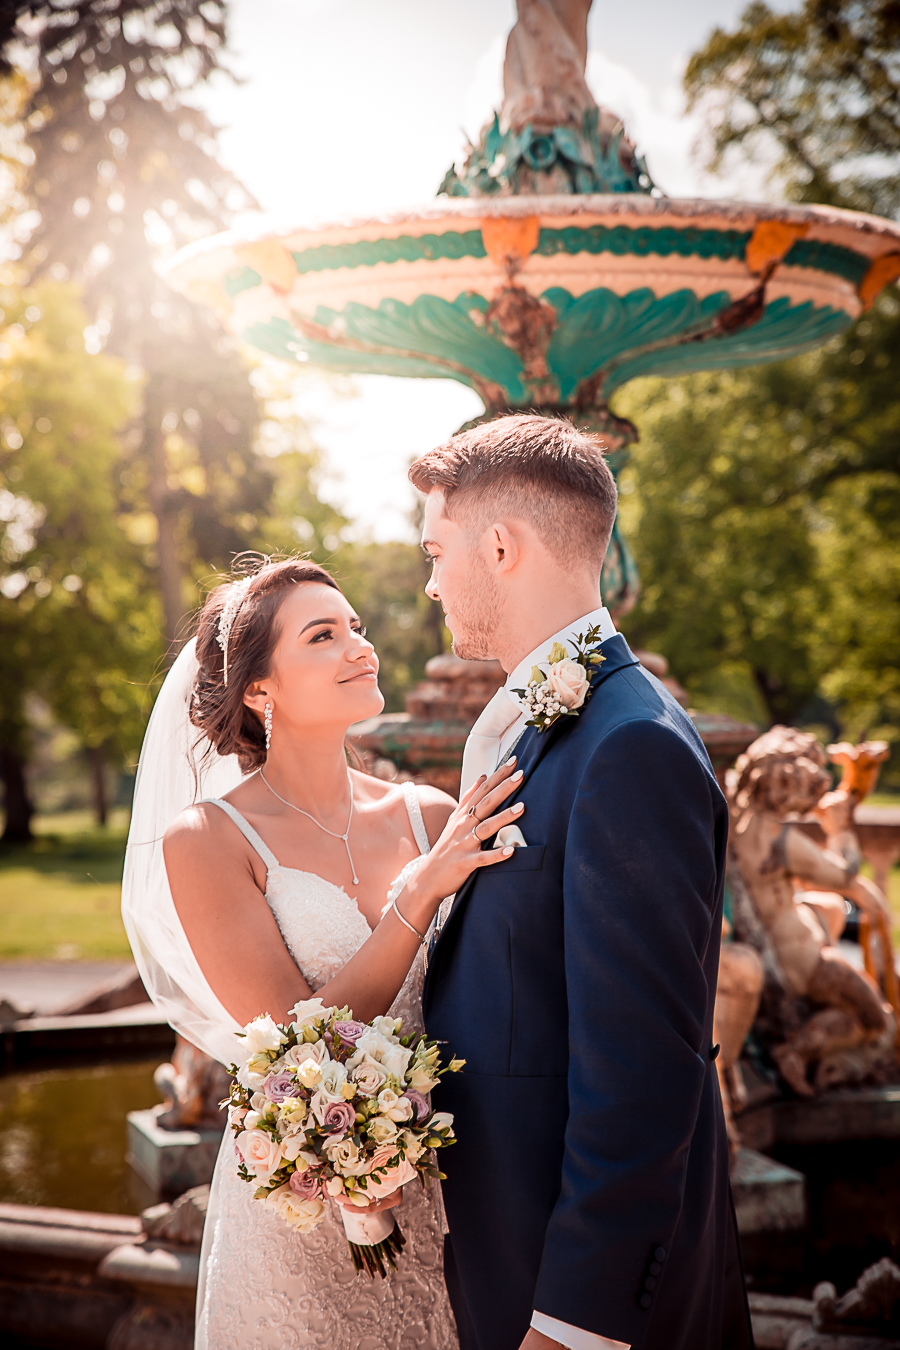 Real wedding at Chateau Impney classic glamorous style, Nicholas Rogers Photography (15)